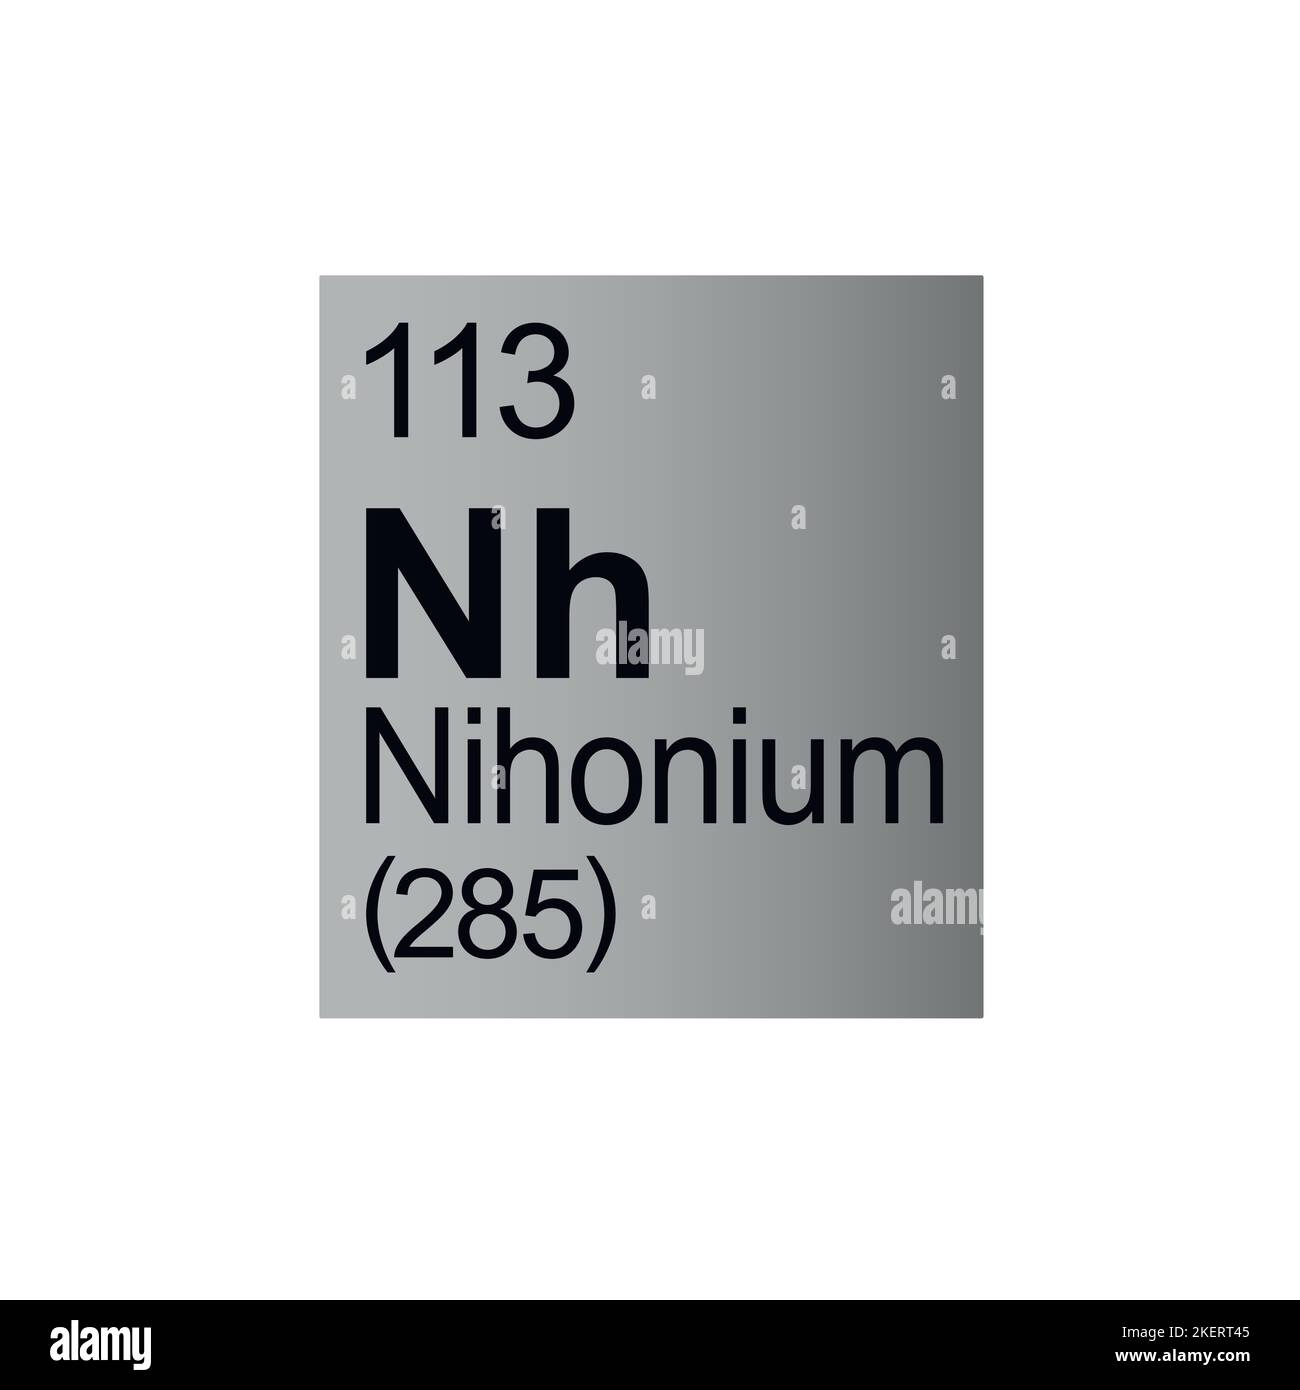 Nihonium chemical element of Mendeleev Periodic Table on grey background. Colorful vector illustration - shows number, symbol, name and atomic weight. Stock Vector